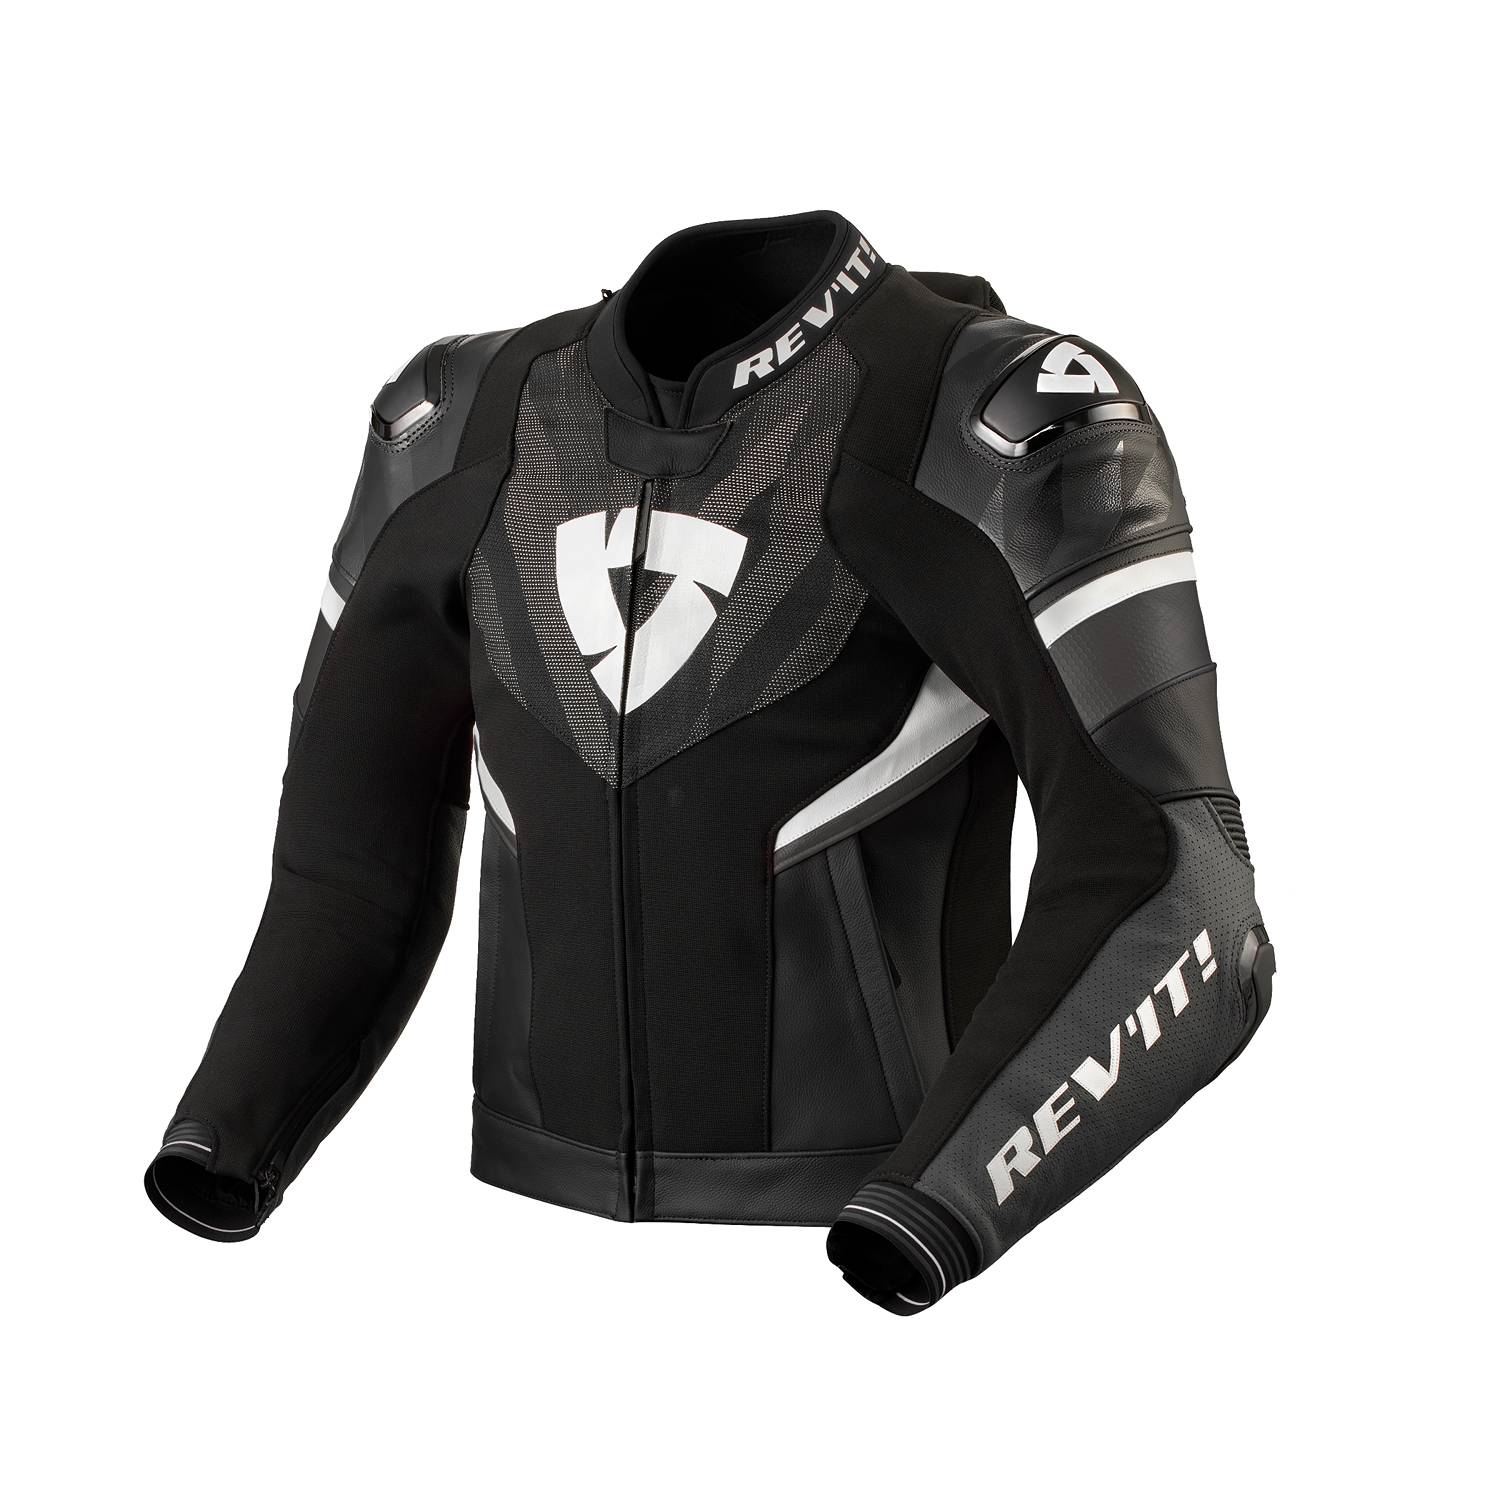 Image of REV'IT! Hyperspeed 2 Pro Jacket Black Anthracite Size 54 ID 8700001358620